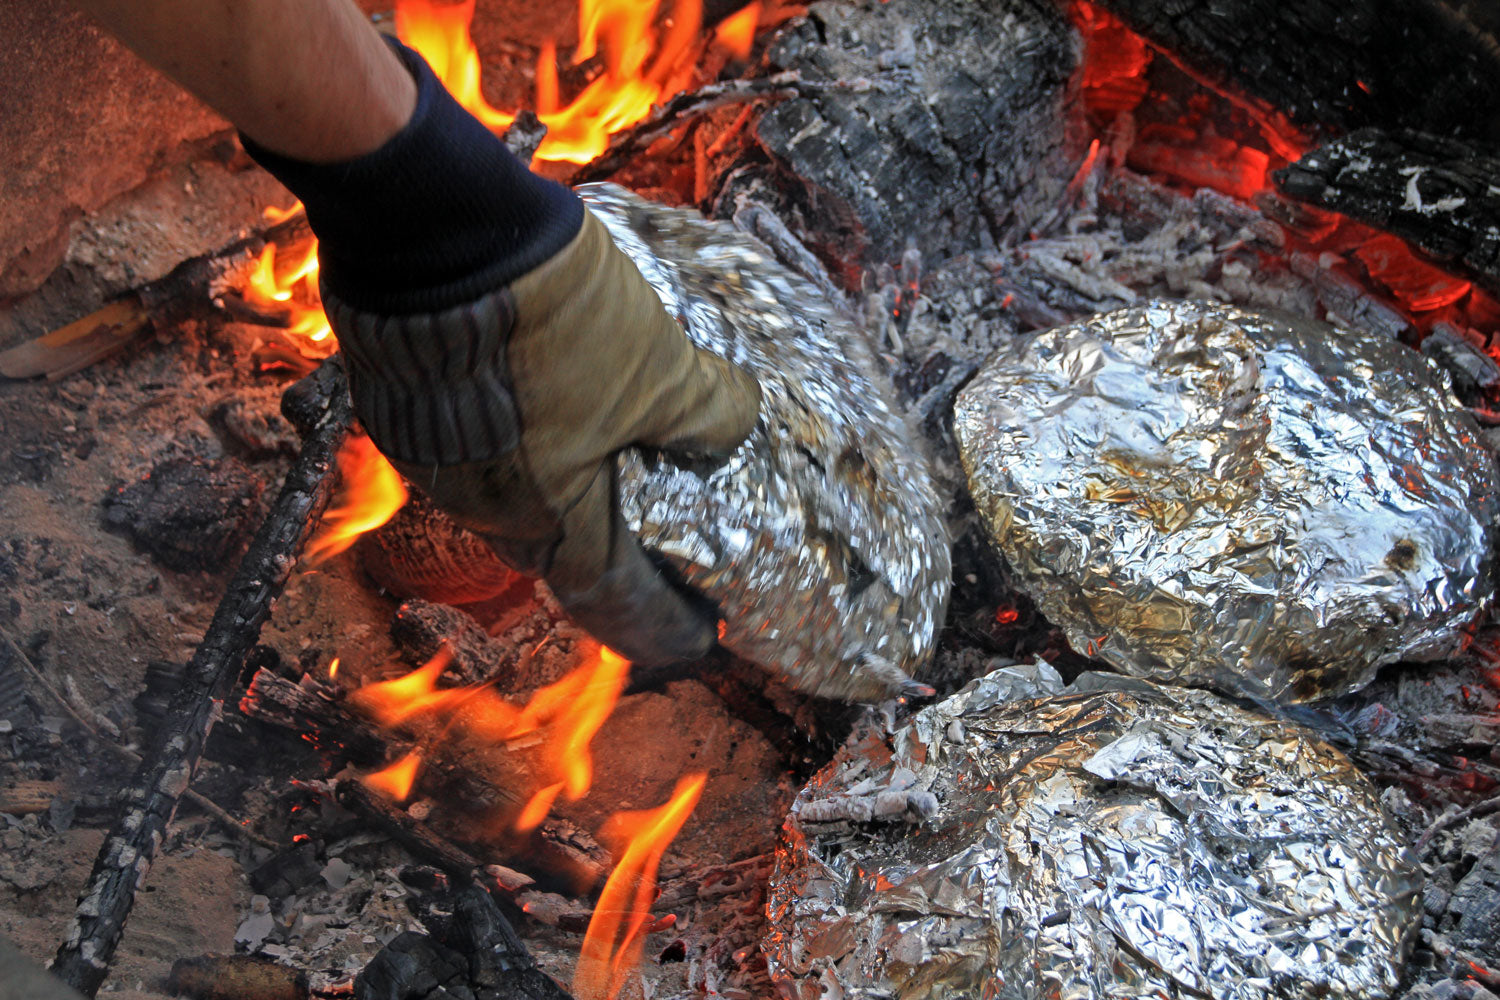 Person wearing gloves is putting food to cook in the fire